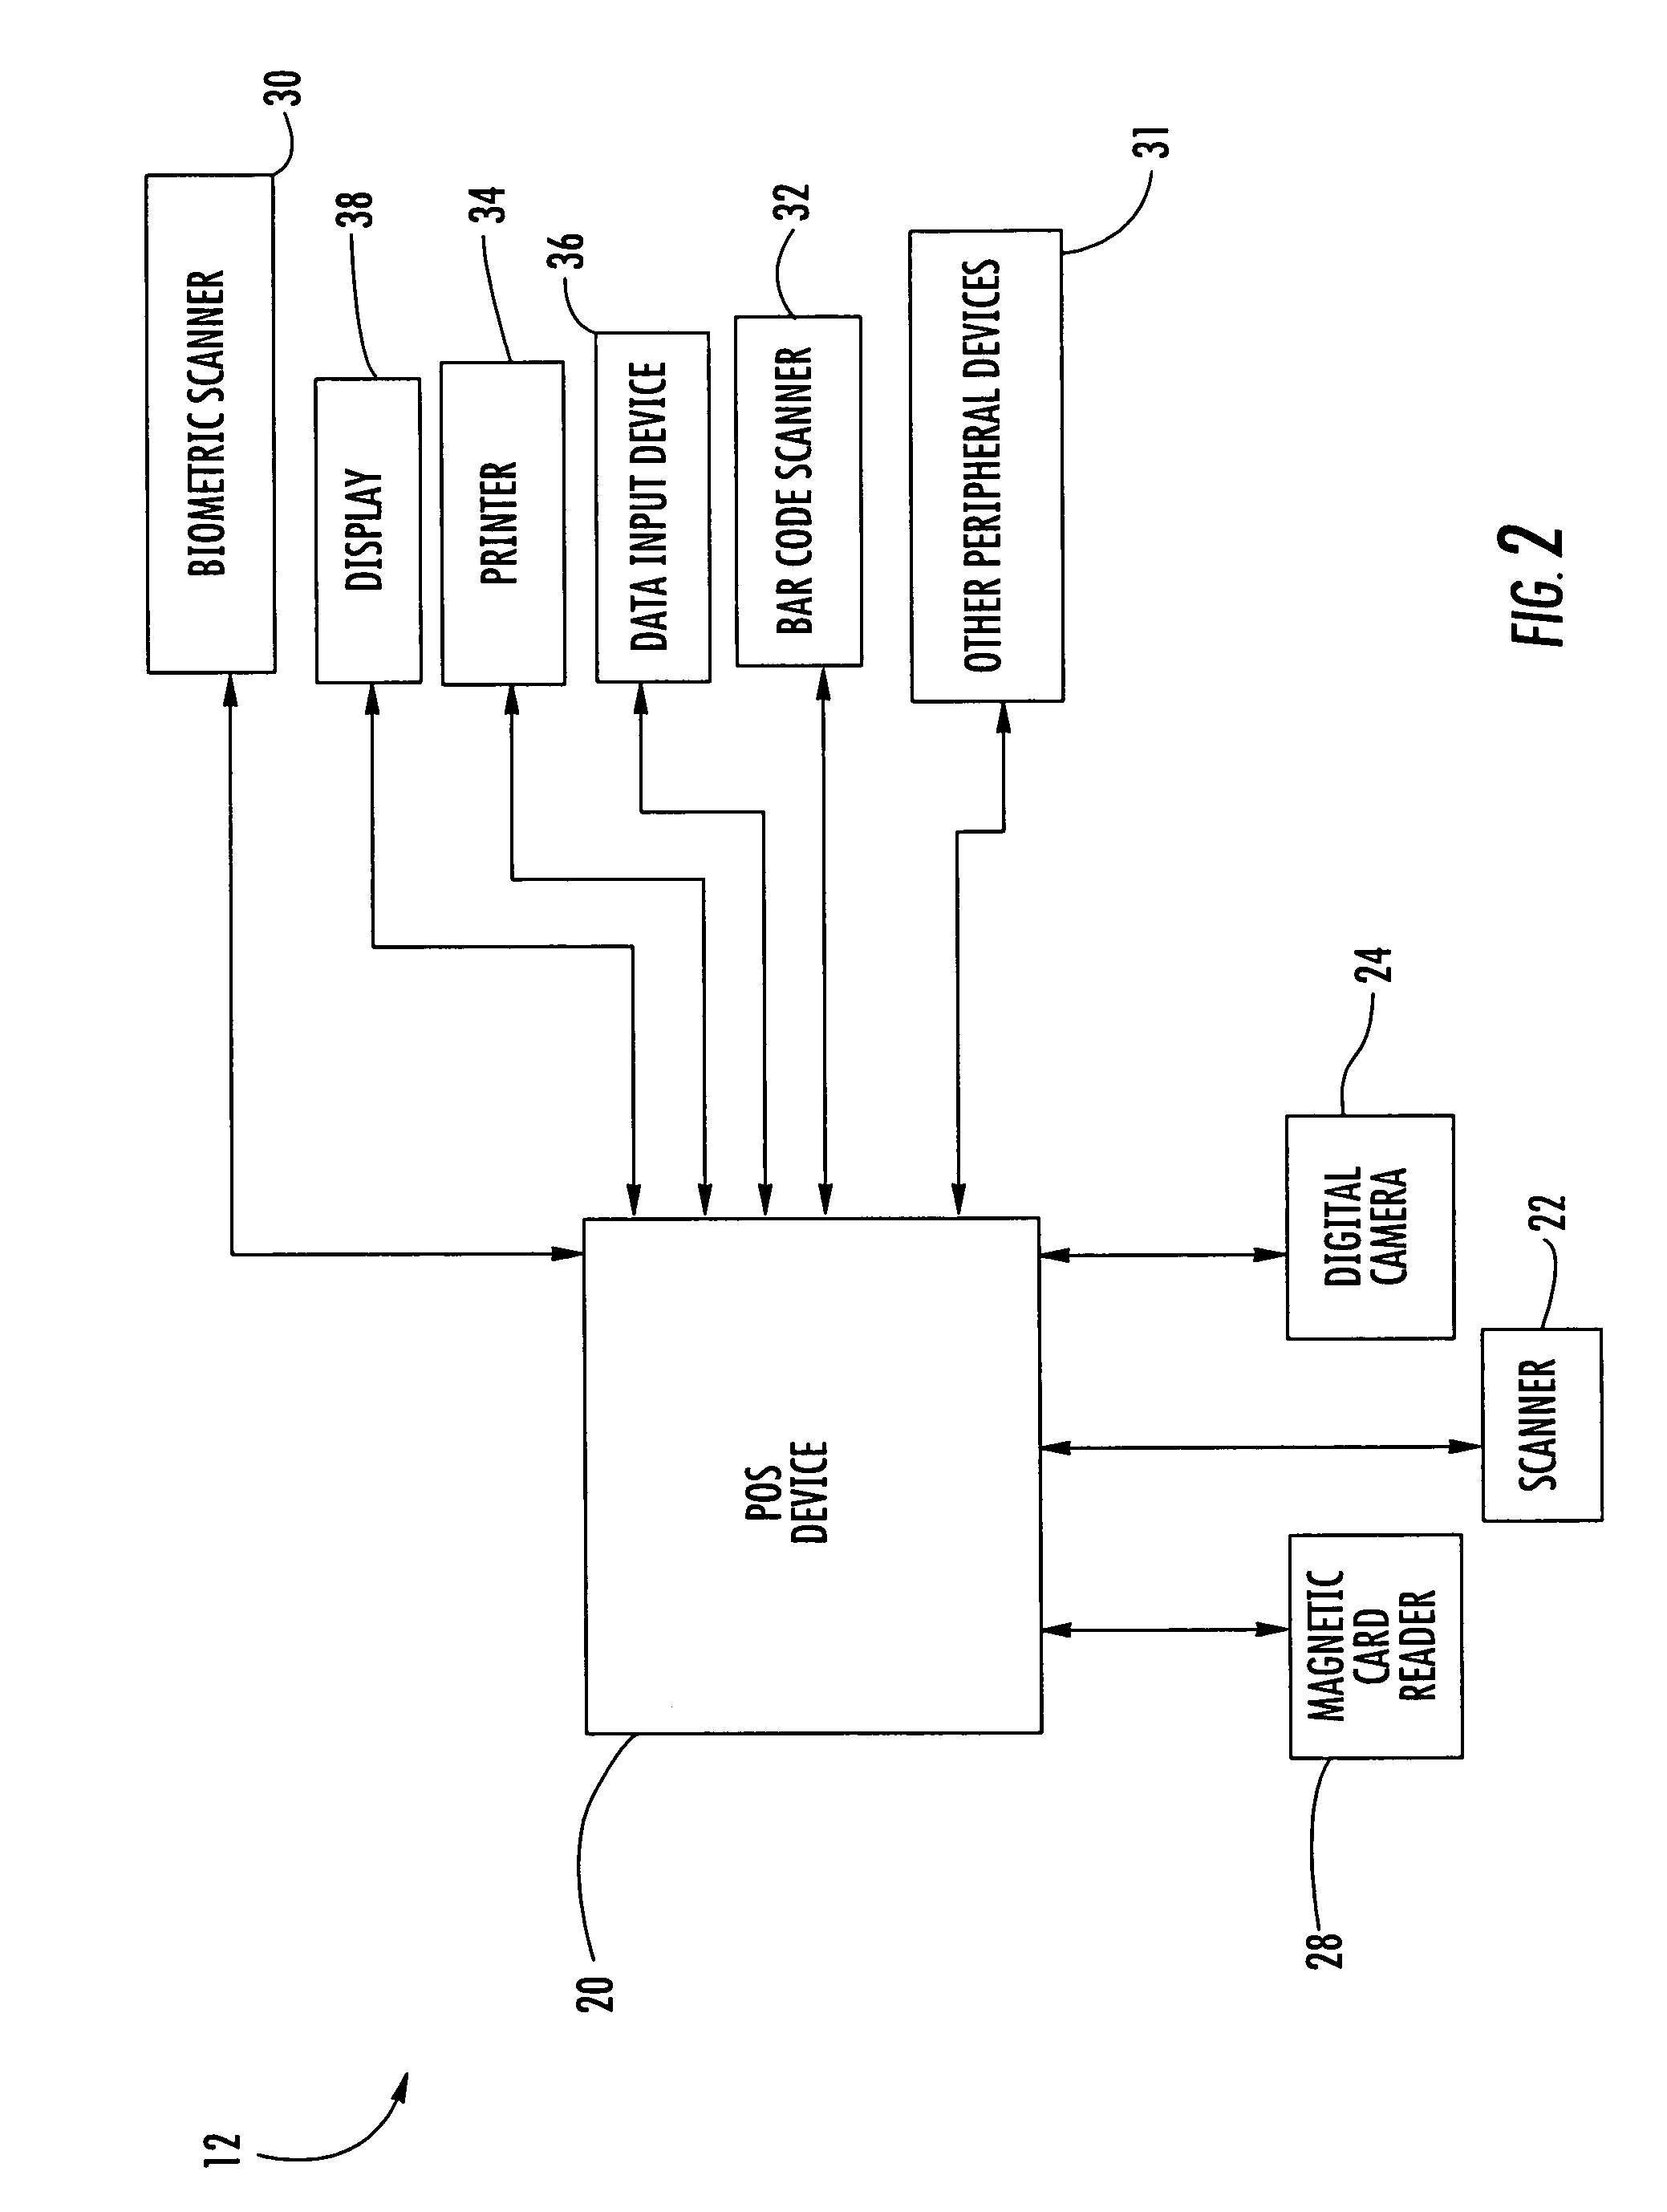 Trucking document delivery system and method